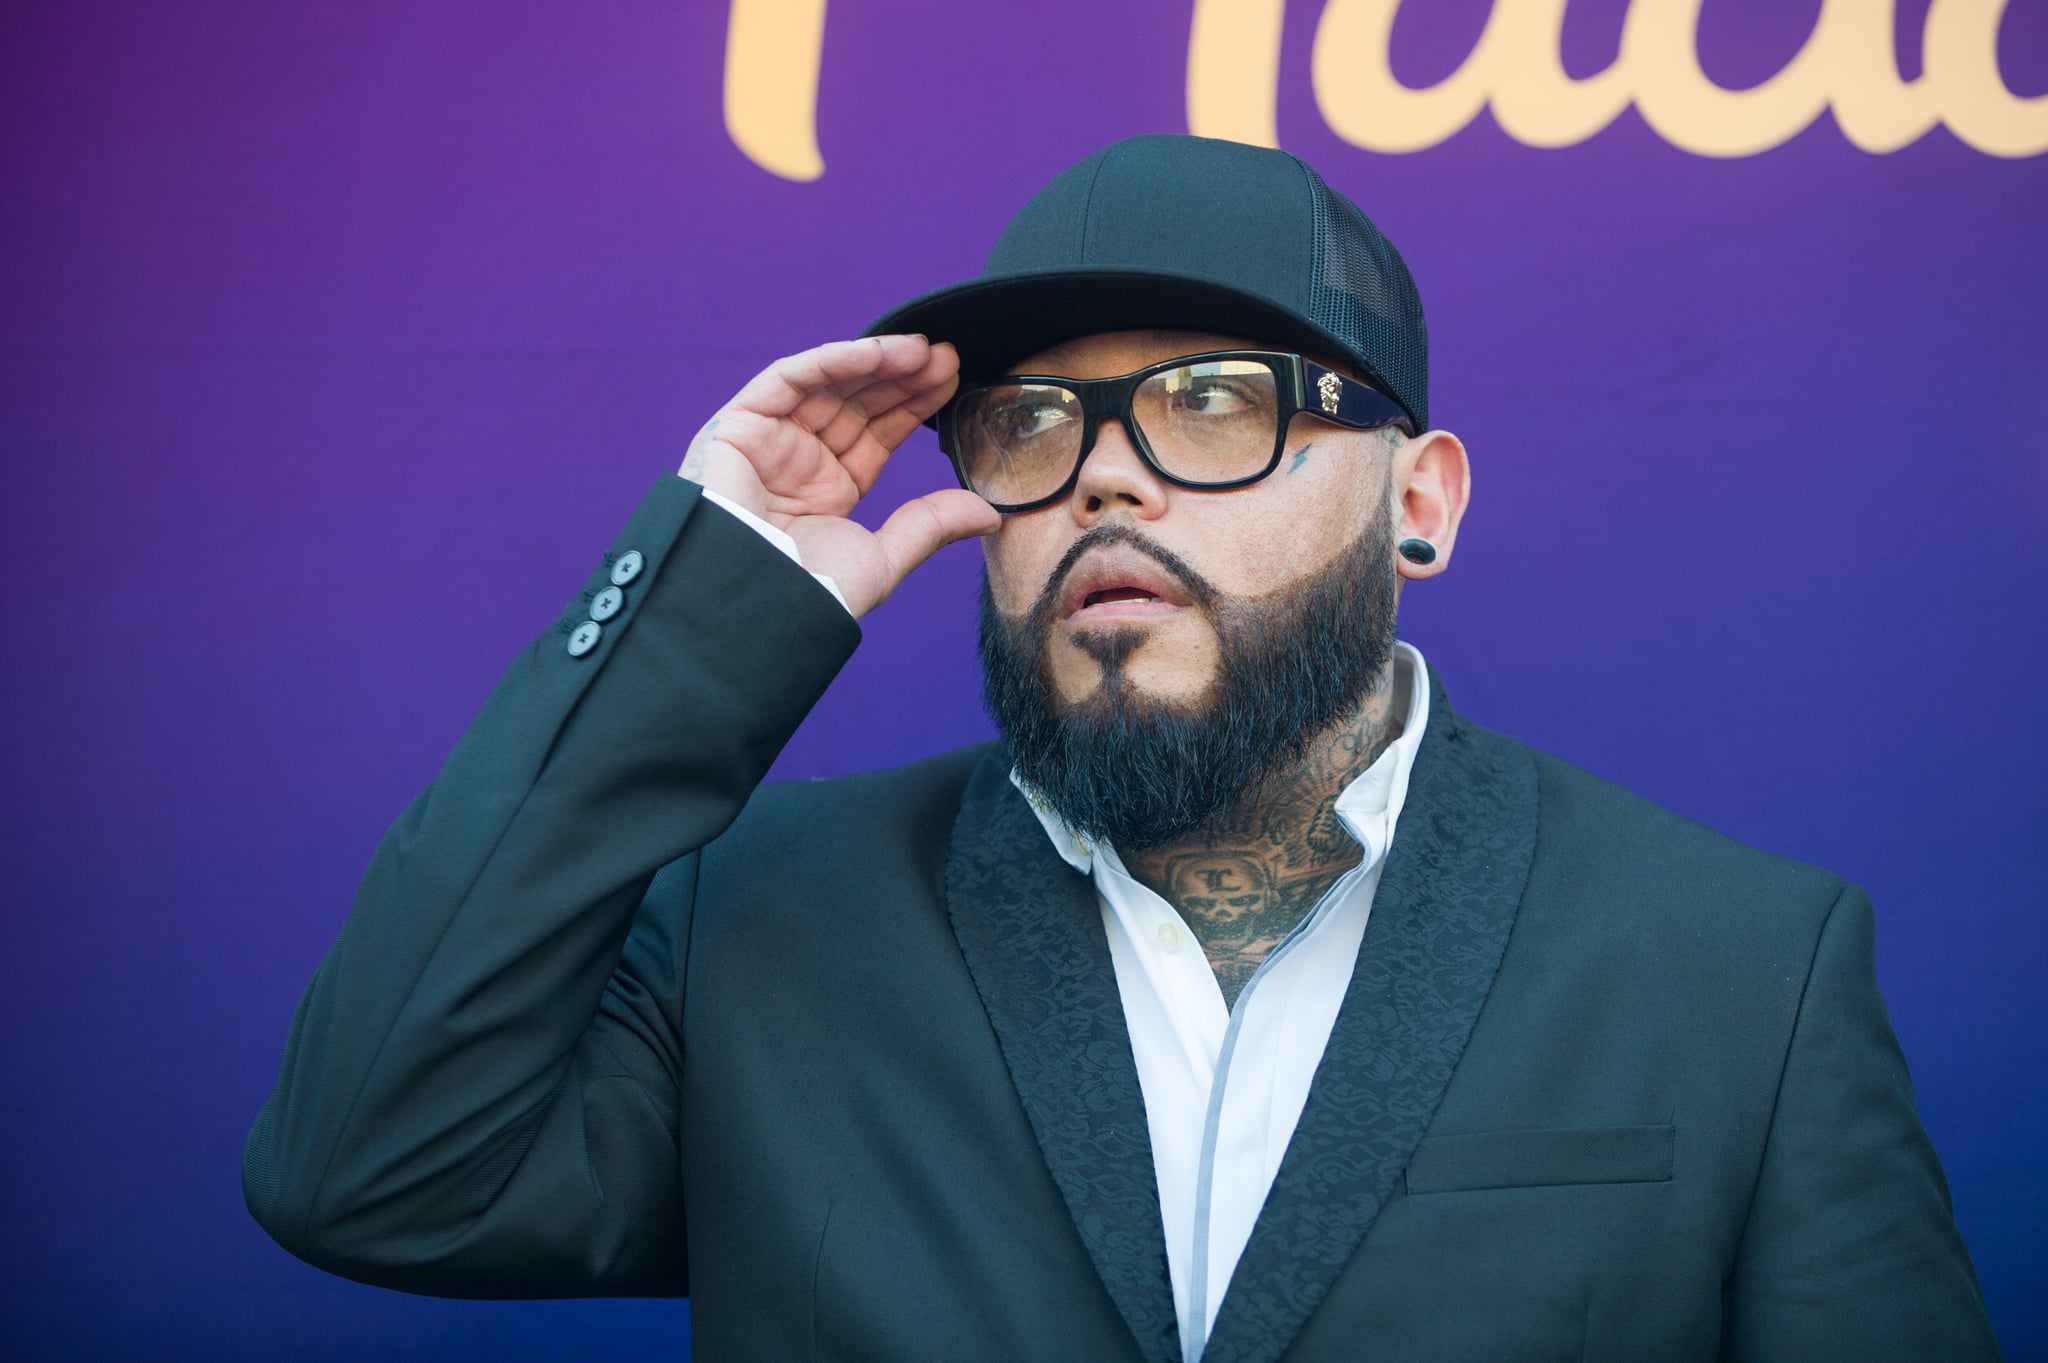 HOLLYWOOD, CA - AUGUST 30:  A.B. Quintanilla attends 'Madame Tussauds Hollywood unveils a wax figure of Selena Quintanilla' at Madame Tussauds on August 30, 2016 in Hollywood, California.  (Photo by Emma McIntyre/Getty Images)